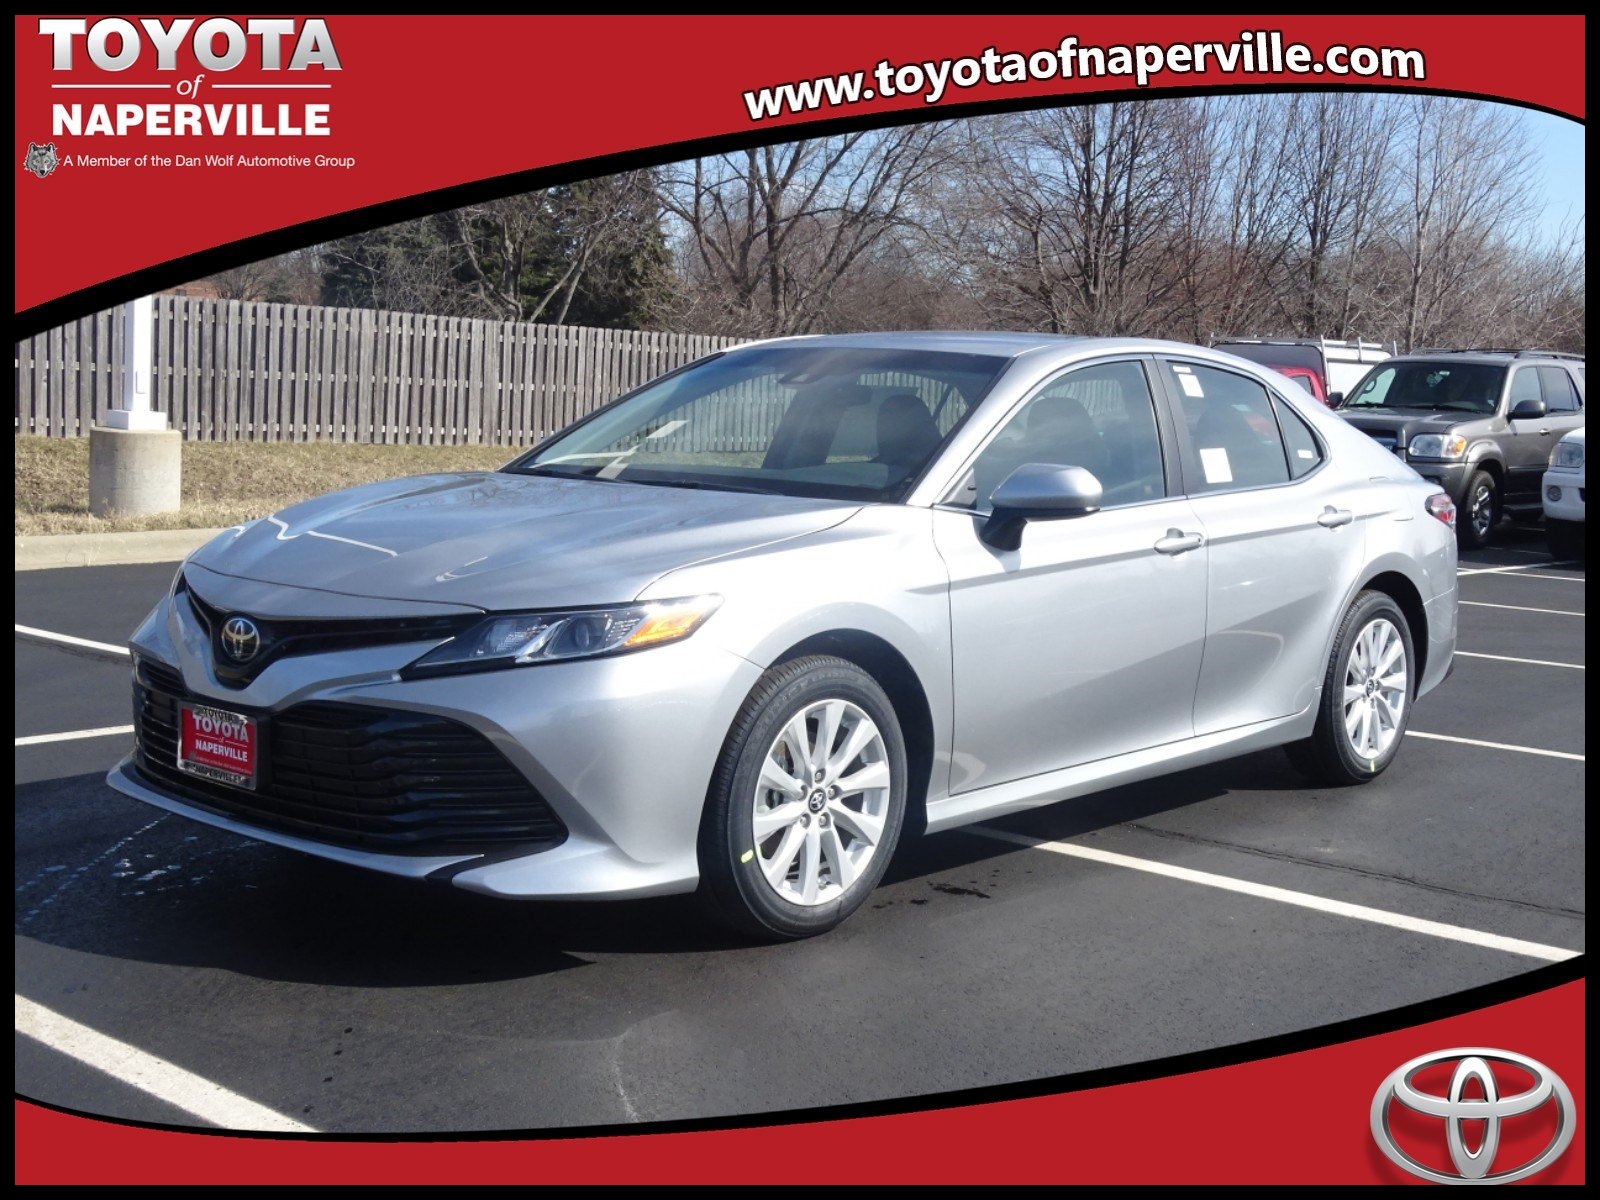 News New 2018 toyota Camry Le 4d Sedan In Naperville C Overview and Price